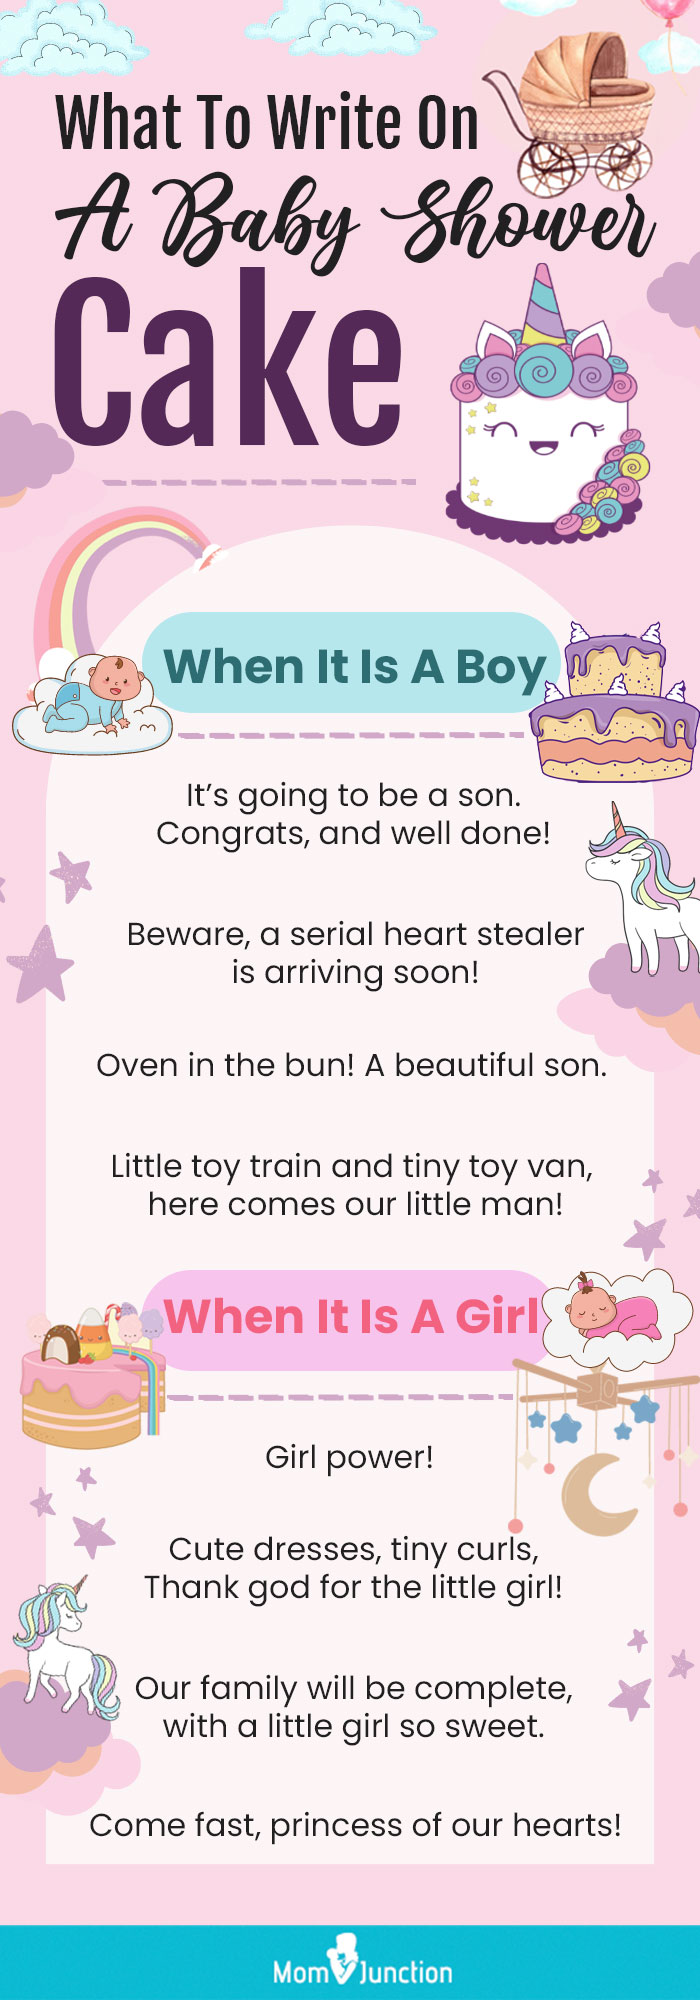 what to write on a baby shower cake (infographic)